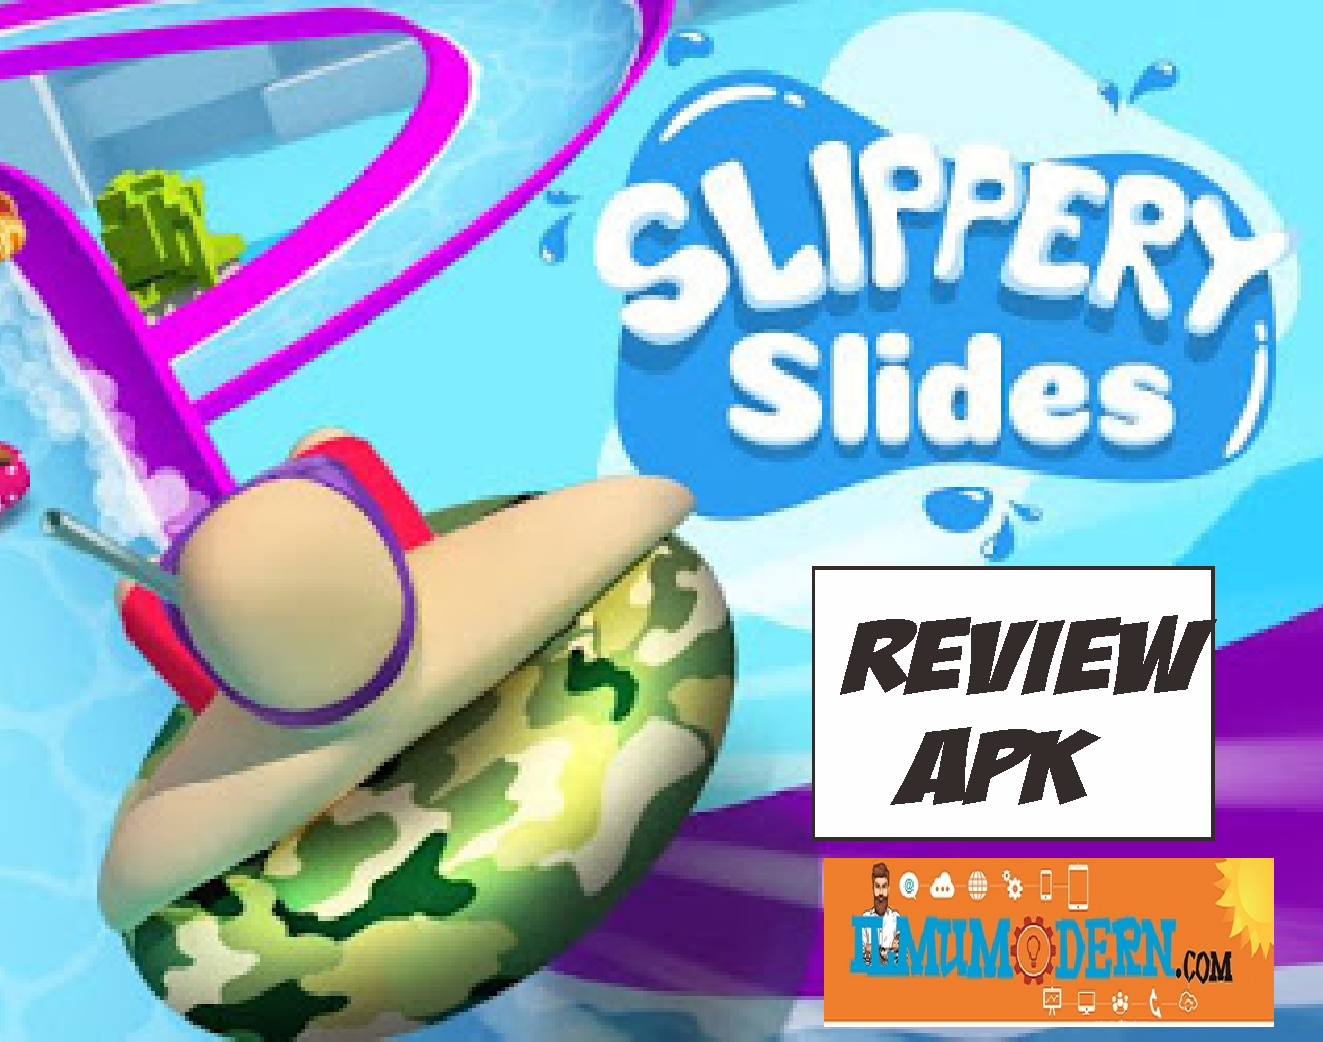 Game Balapan slippery slides Review Apk Android